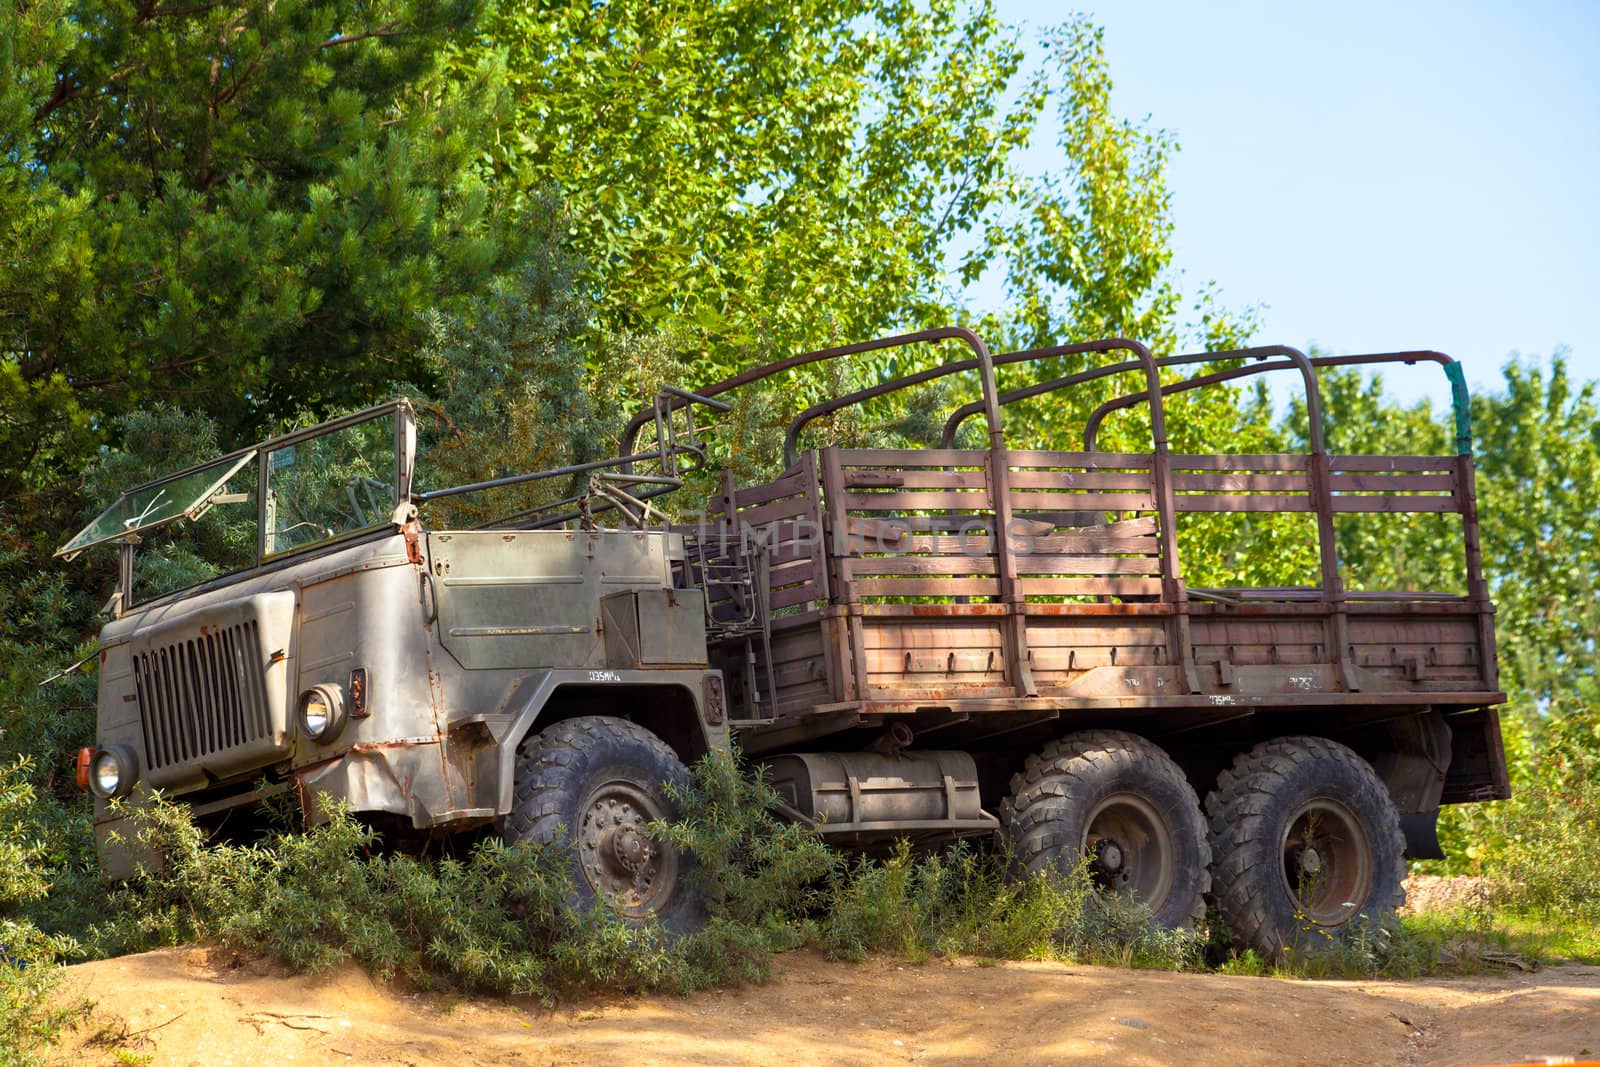 Old vintage military truck stuck in the bushes
